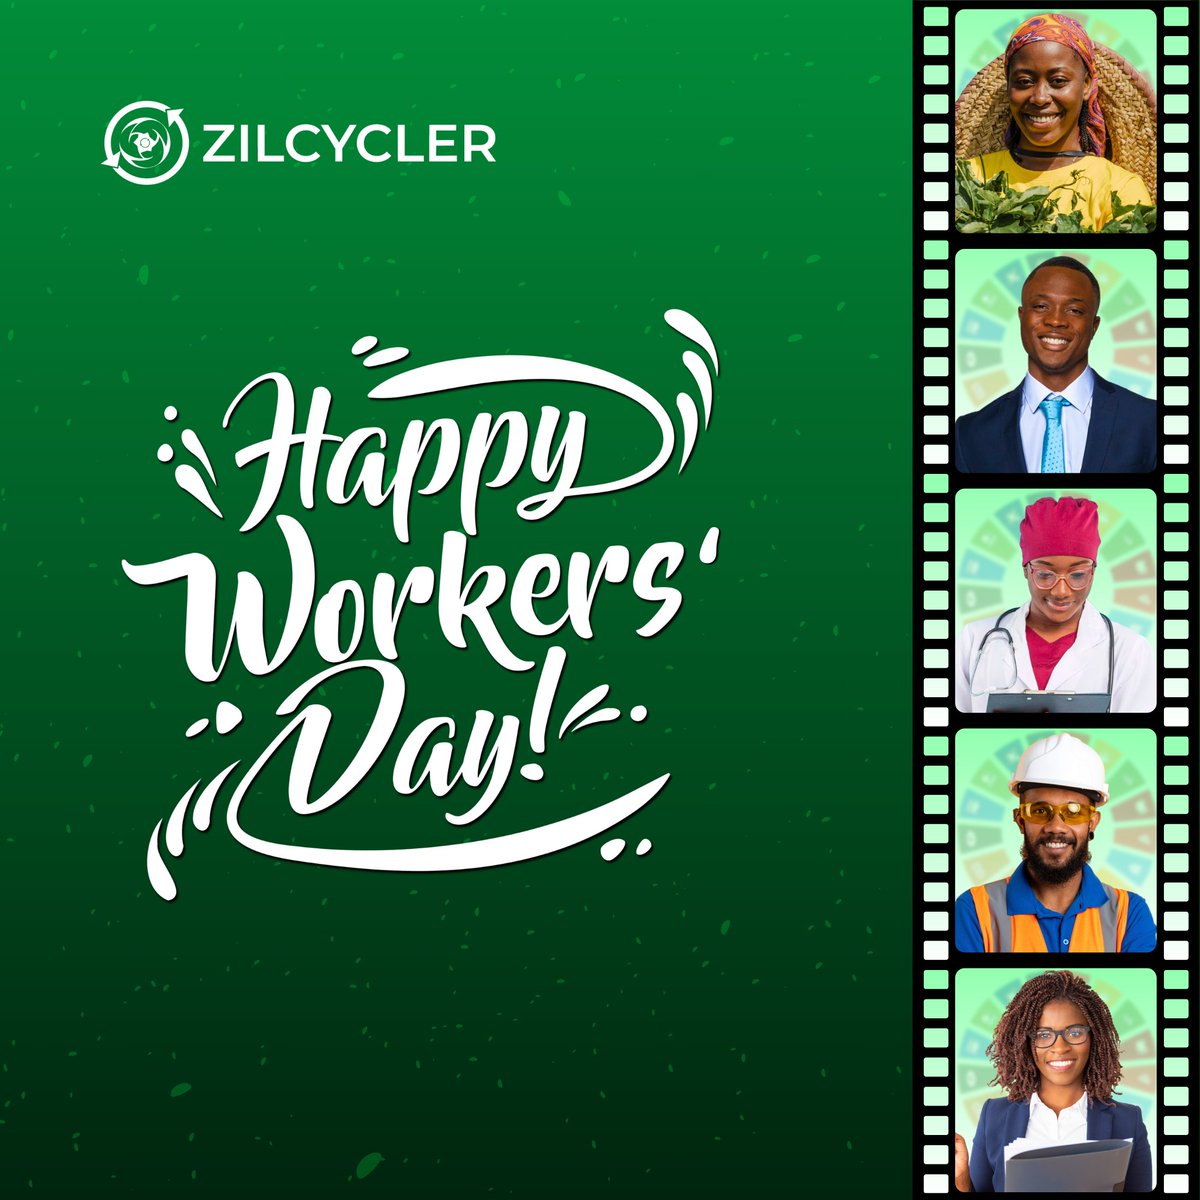 Cheers to the workforce driving a positive charge one way or another! We see you. We respect you. We celebrate you. 🫶🏽🎉

Happy Workers' Day! 😇

#WorkersDay #May1st #SDGs #Sustainability #Zilcycler